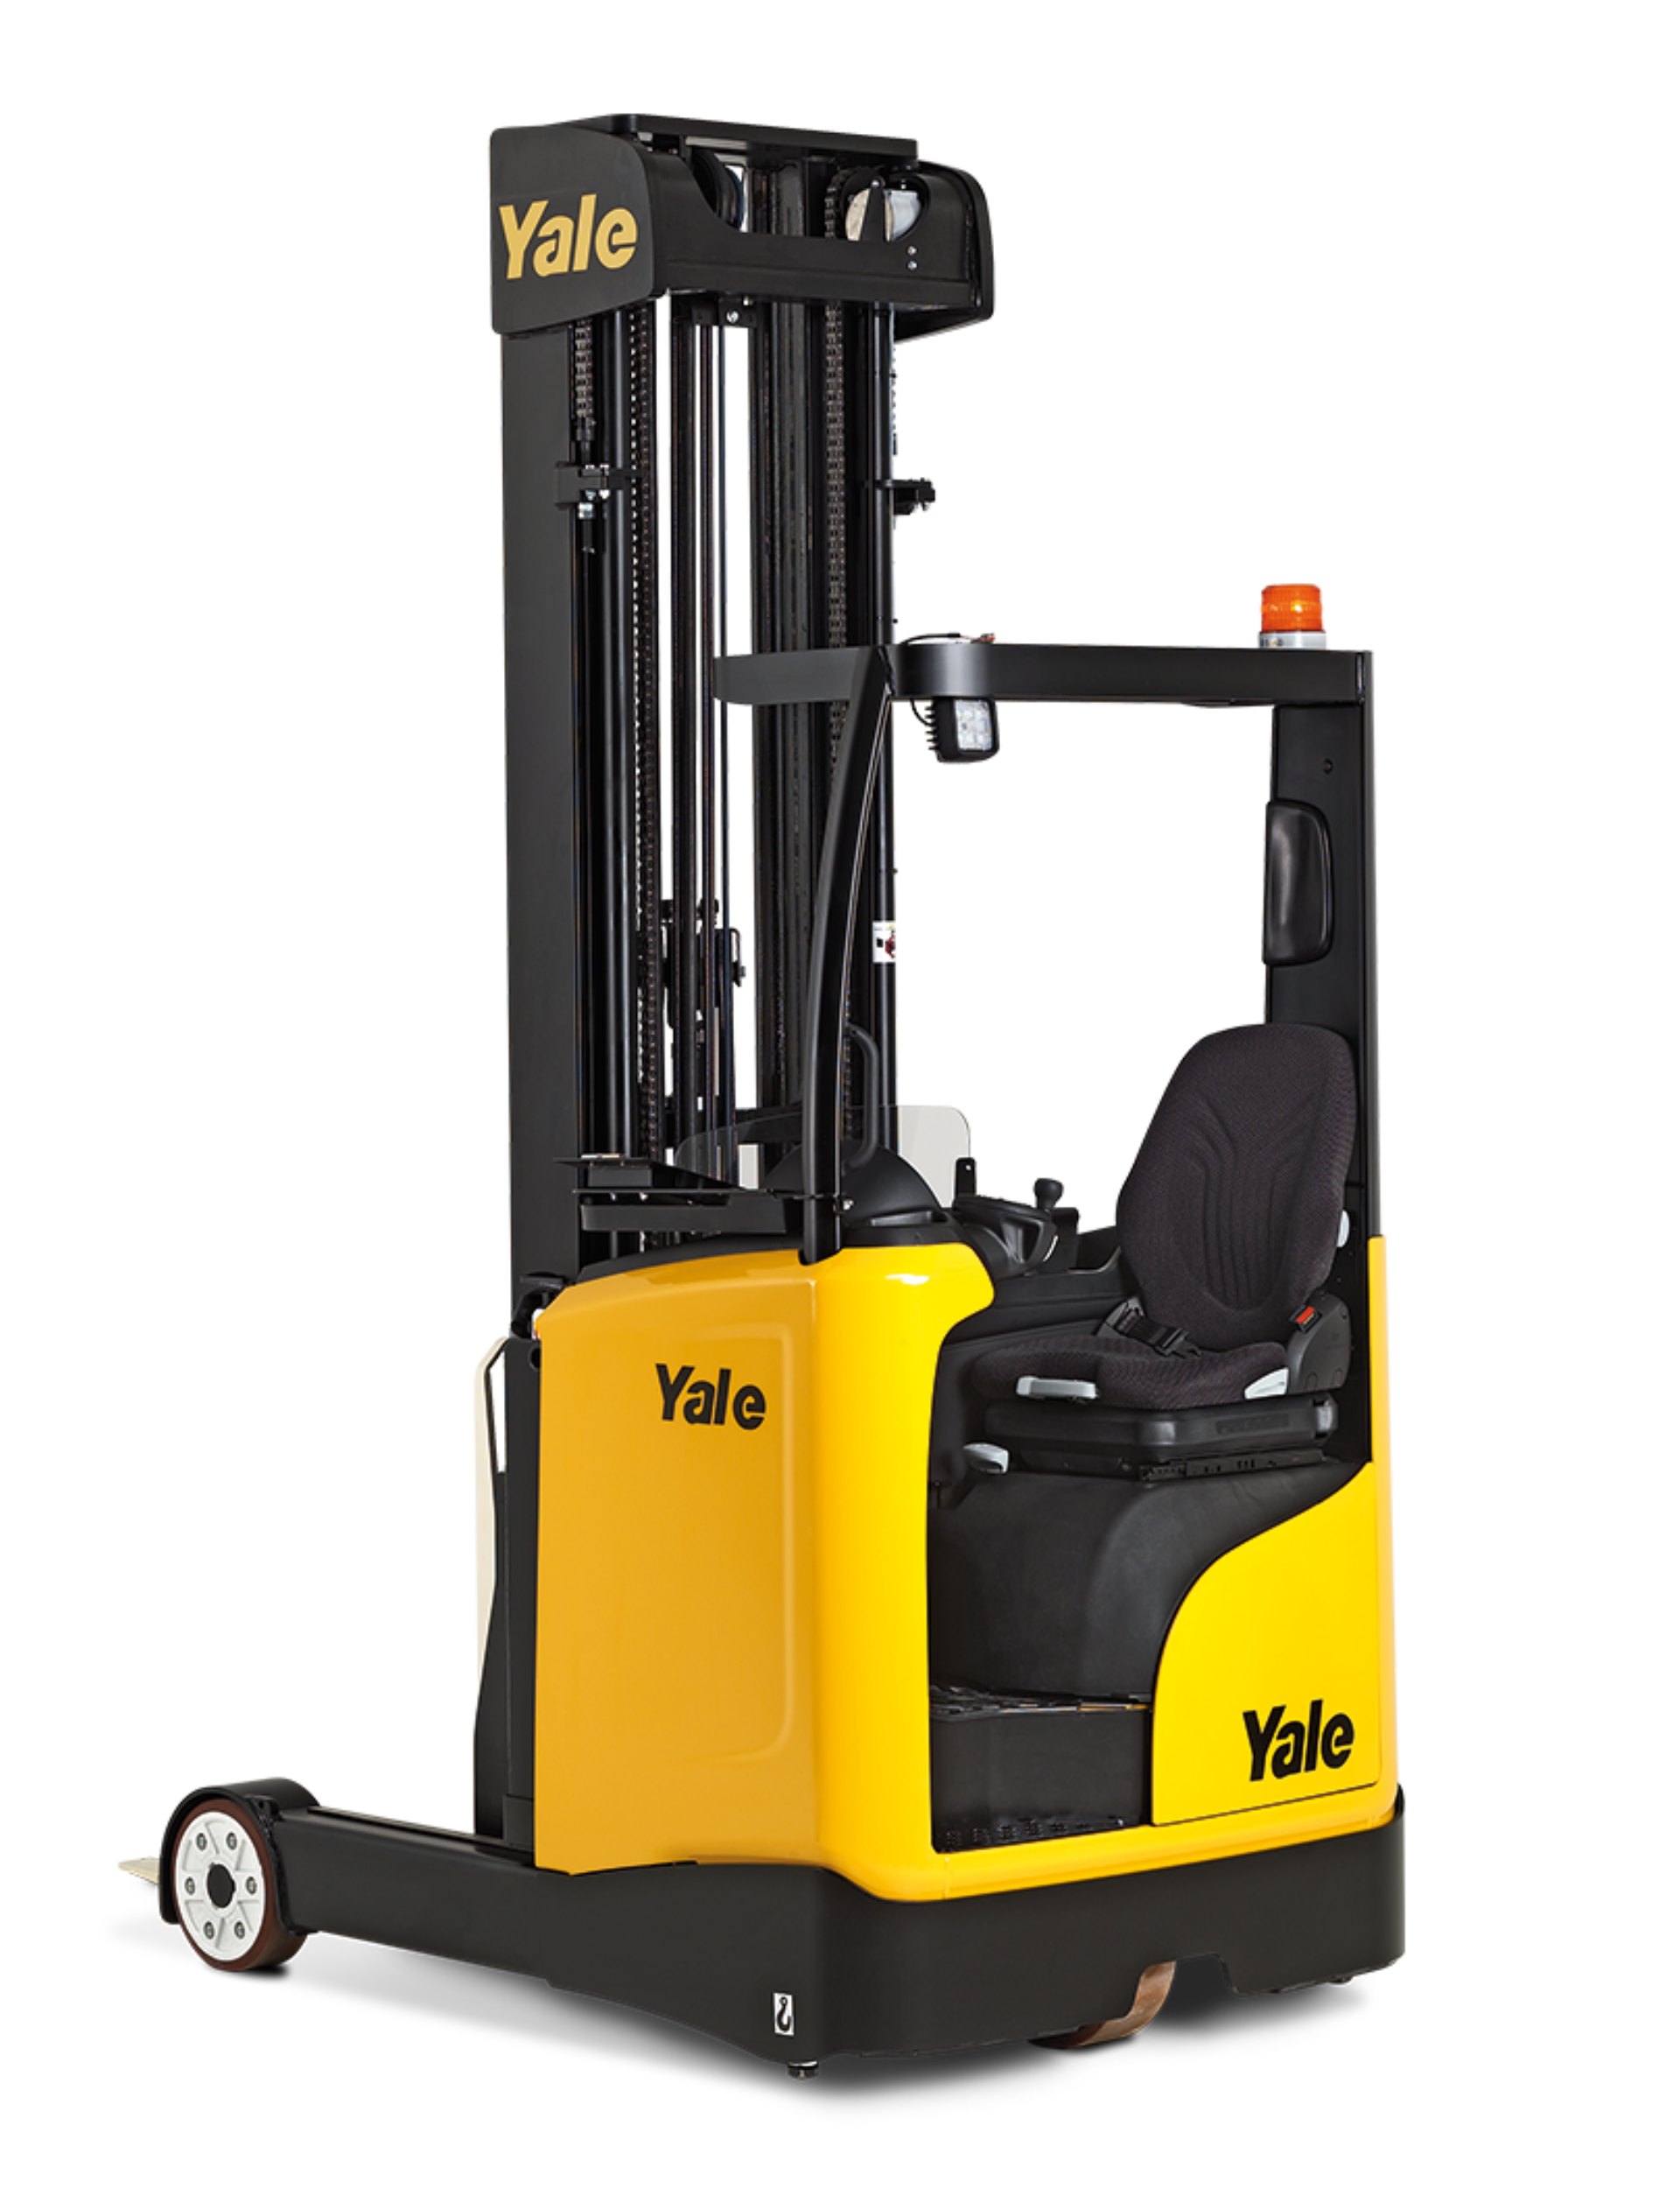 What are the advantages of the Yale reach truck MR series?